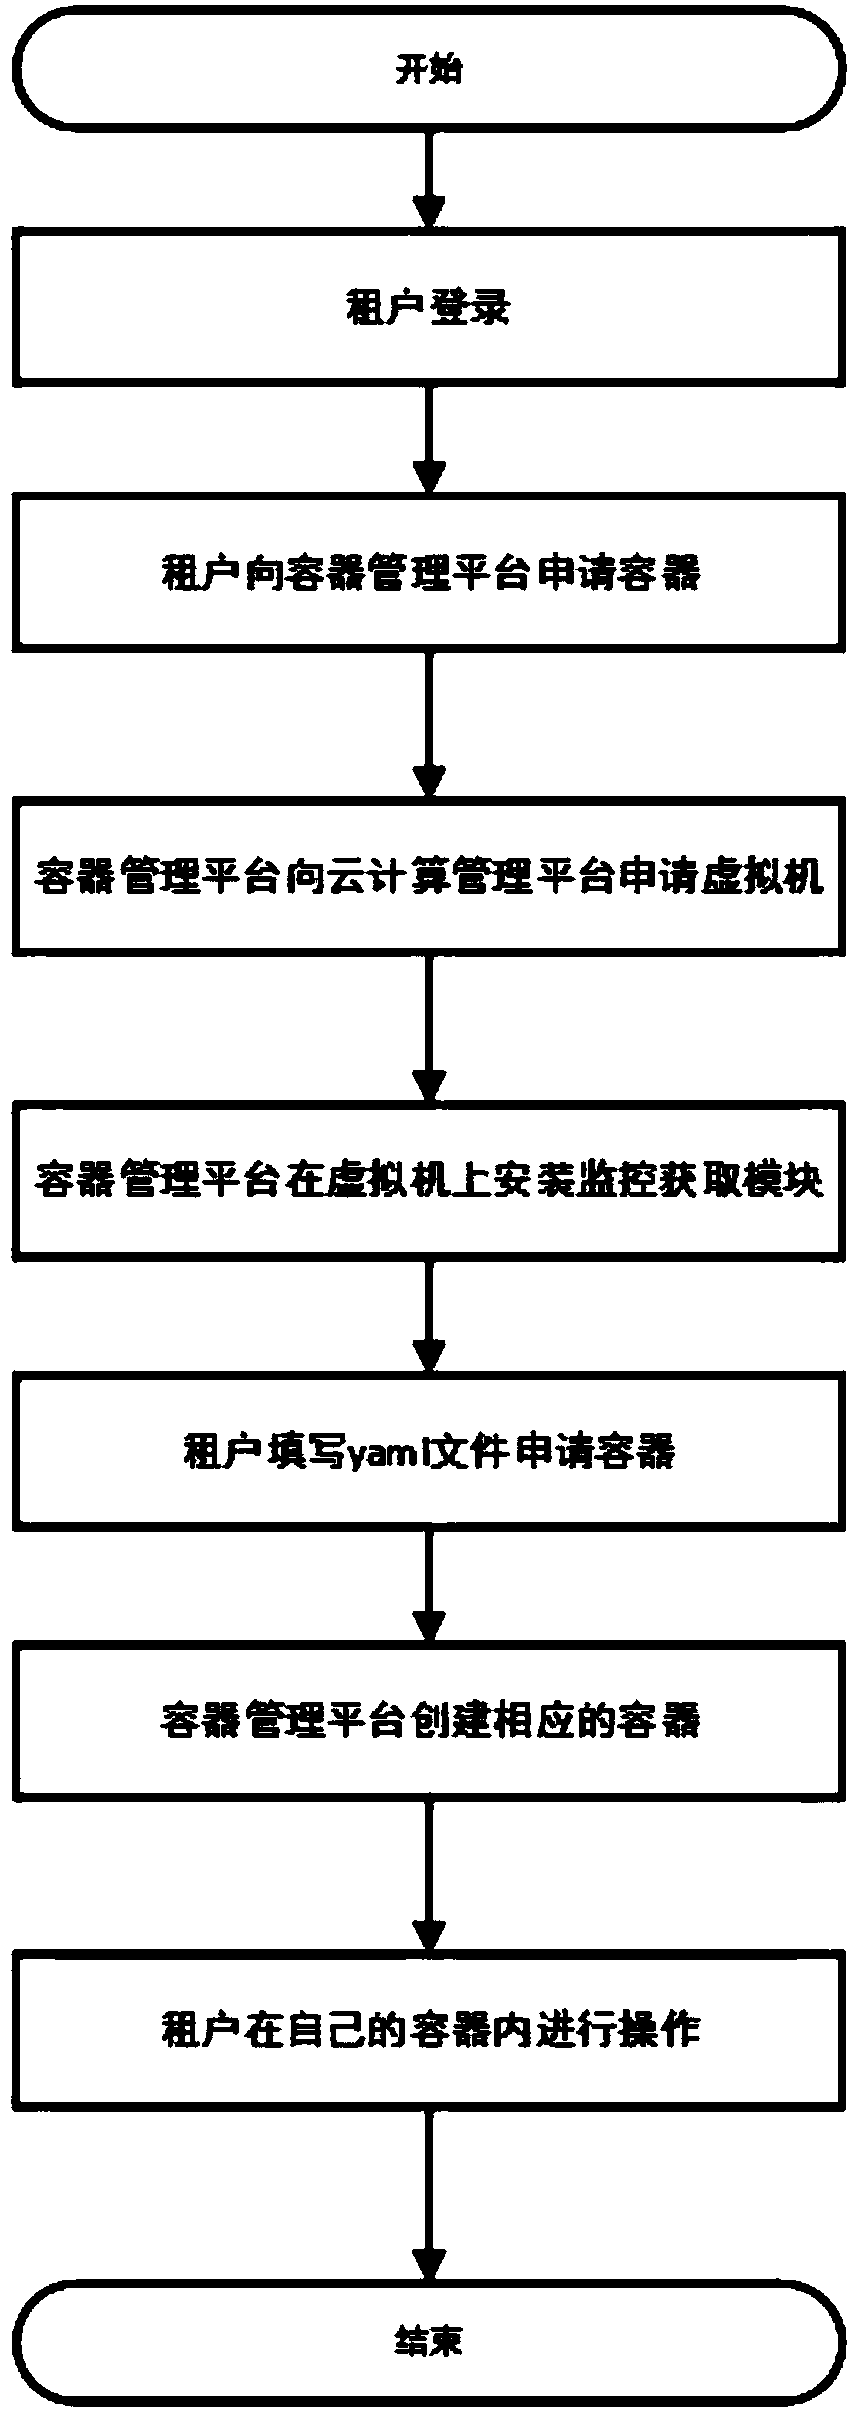 Multi-tenant cloud computing-oriented container security monitoring method and system